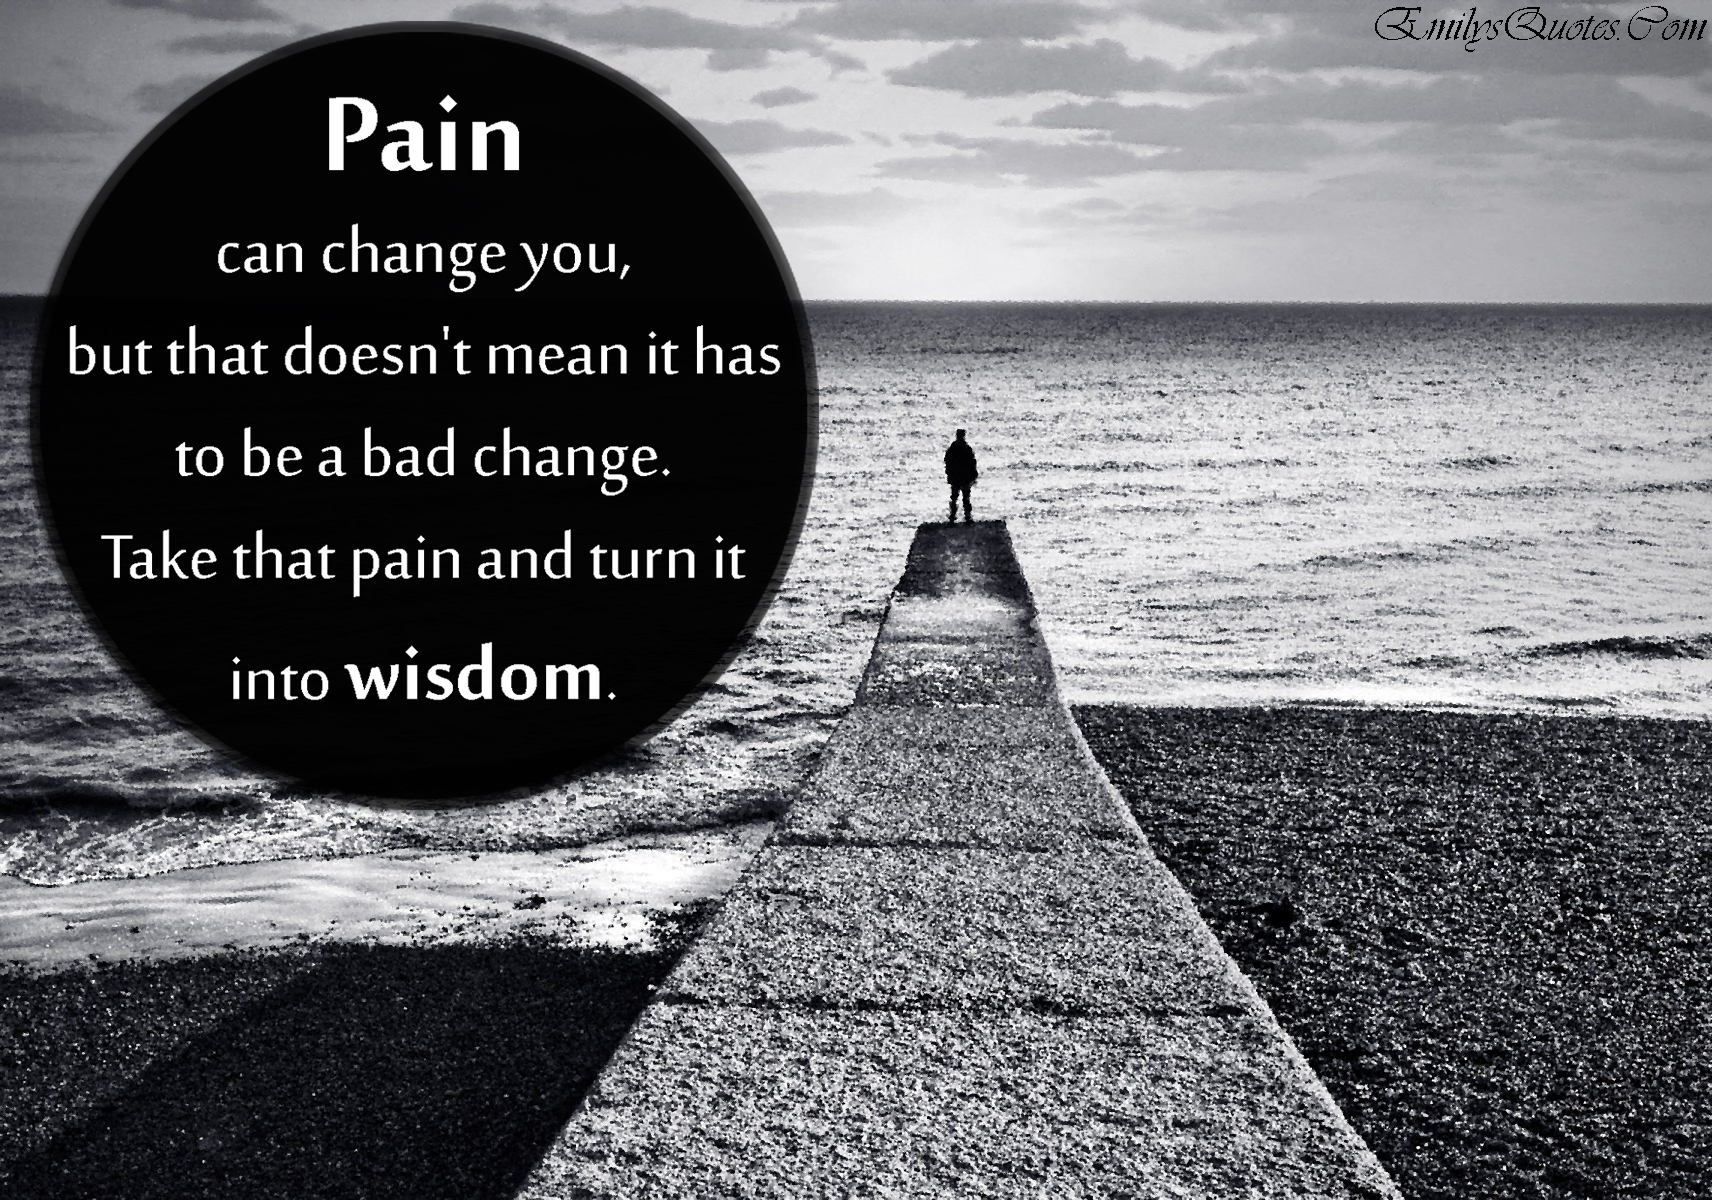 Pain can change you, but that doesn’t mean it has to be a bad change. Take that pain and turn it into wisdom